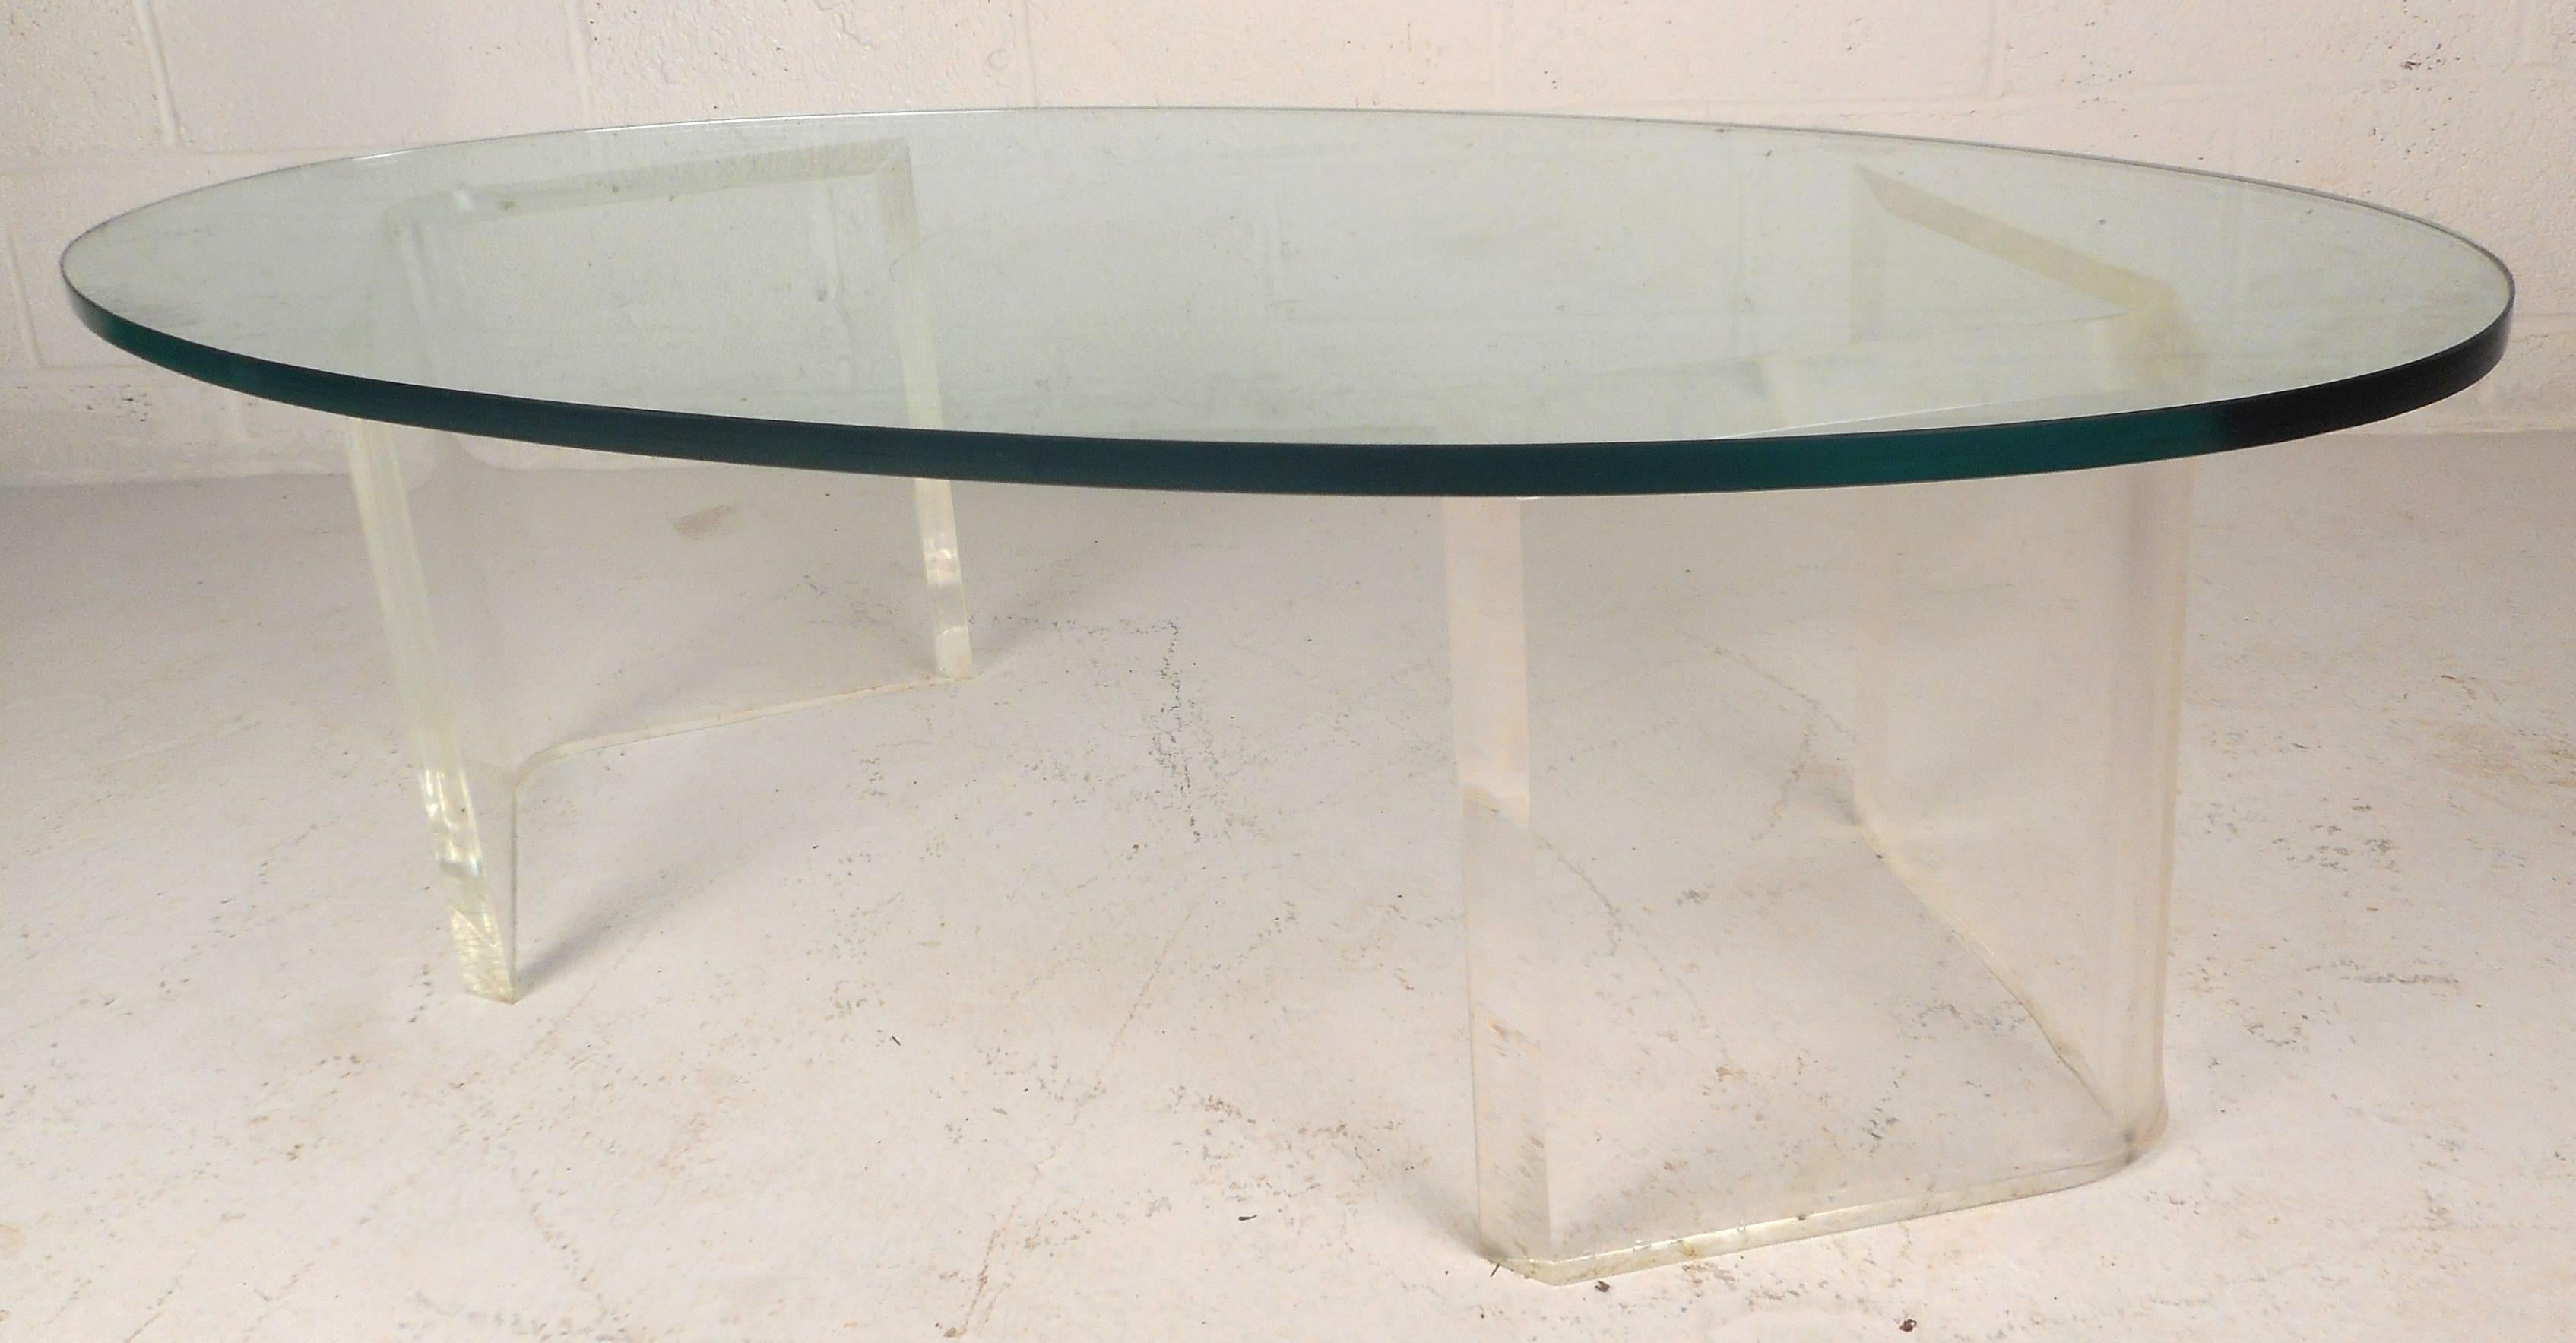 Late 20th Century Mid-Century Modern Oval Glass and Lucite Coffee Table